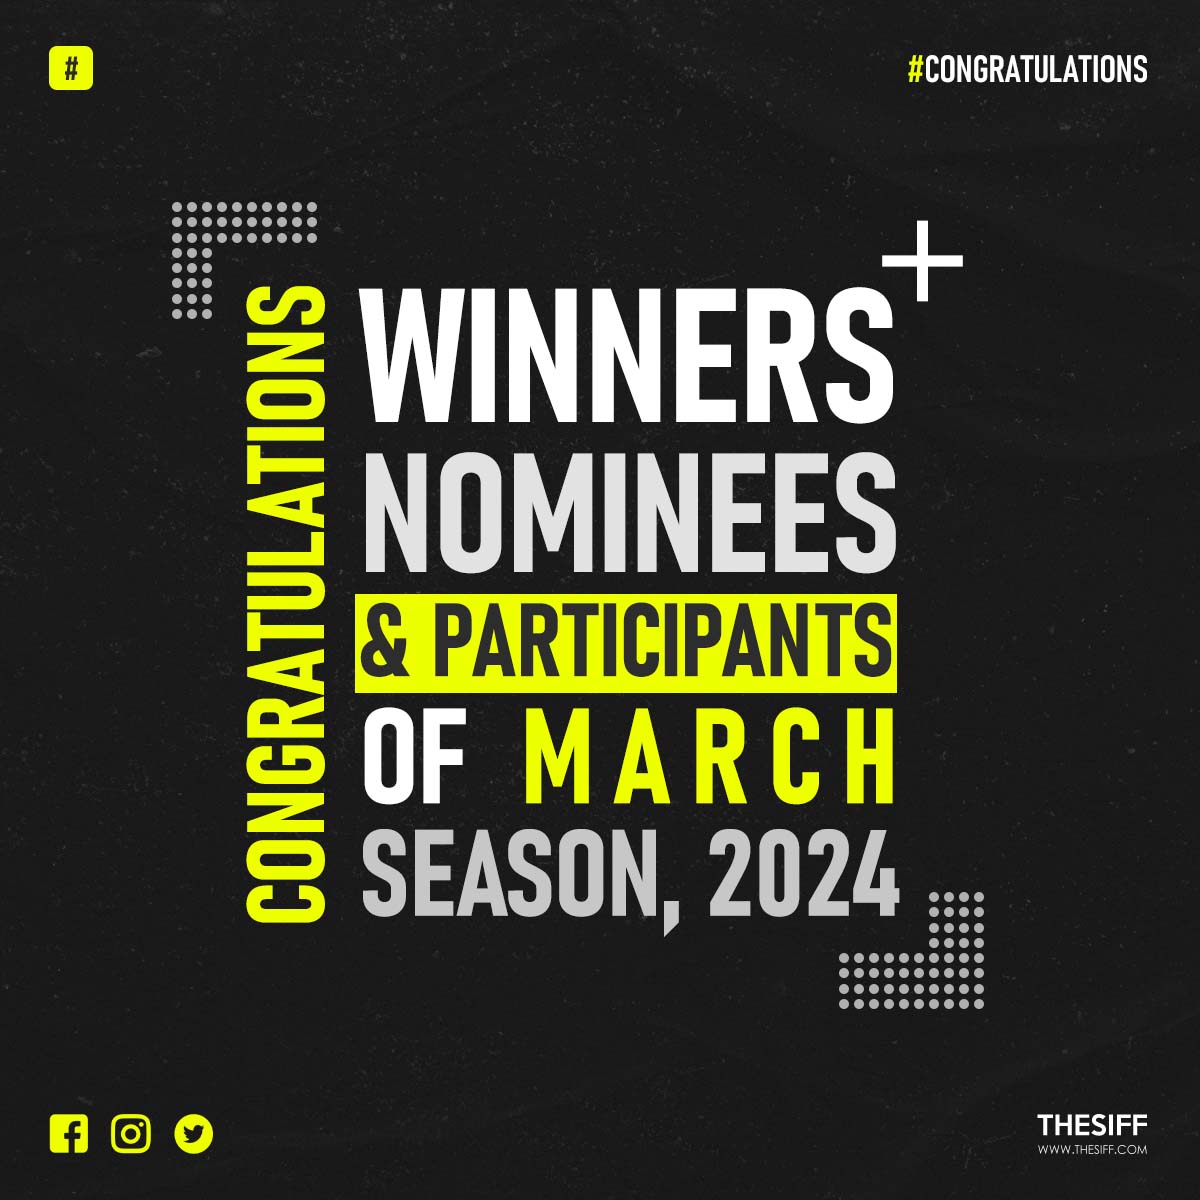 'SIFF' congratulates all the participants and winners of the MARCH, 2024 season. Thank you and keep on supporting us. #congratulations #winners #outstandingachievement #nominee #filmfreeway #indiefilm #supportindiefilm #siff #SIFF2024 @Filmfreeway